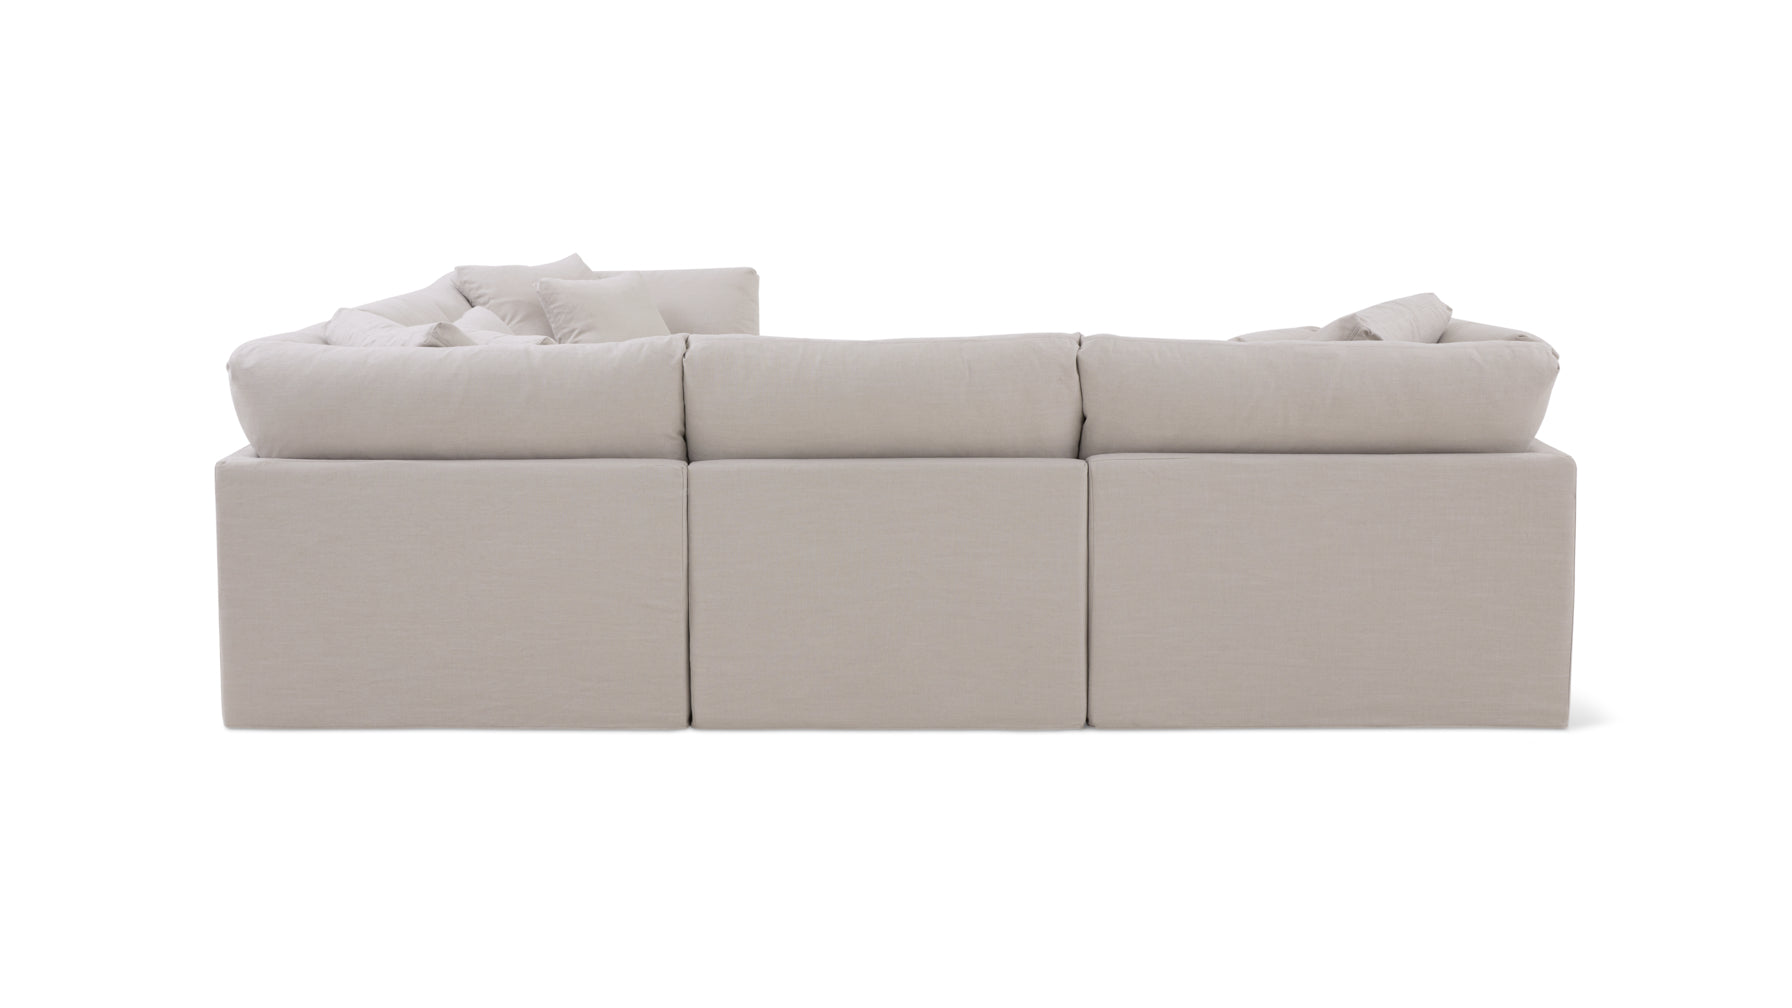 Get Together™ 5-Piece Modular Sectional Closed, Large, Clay - Image 7